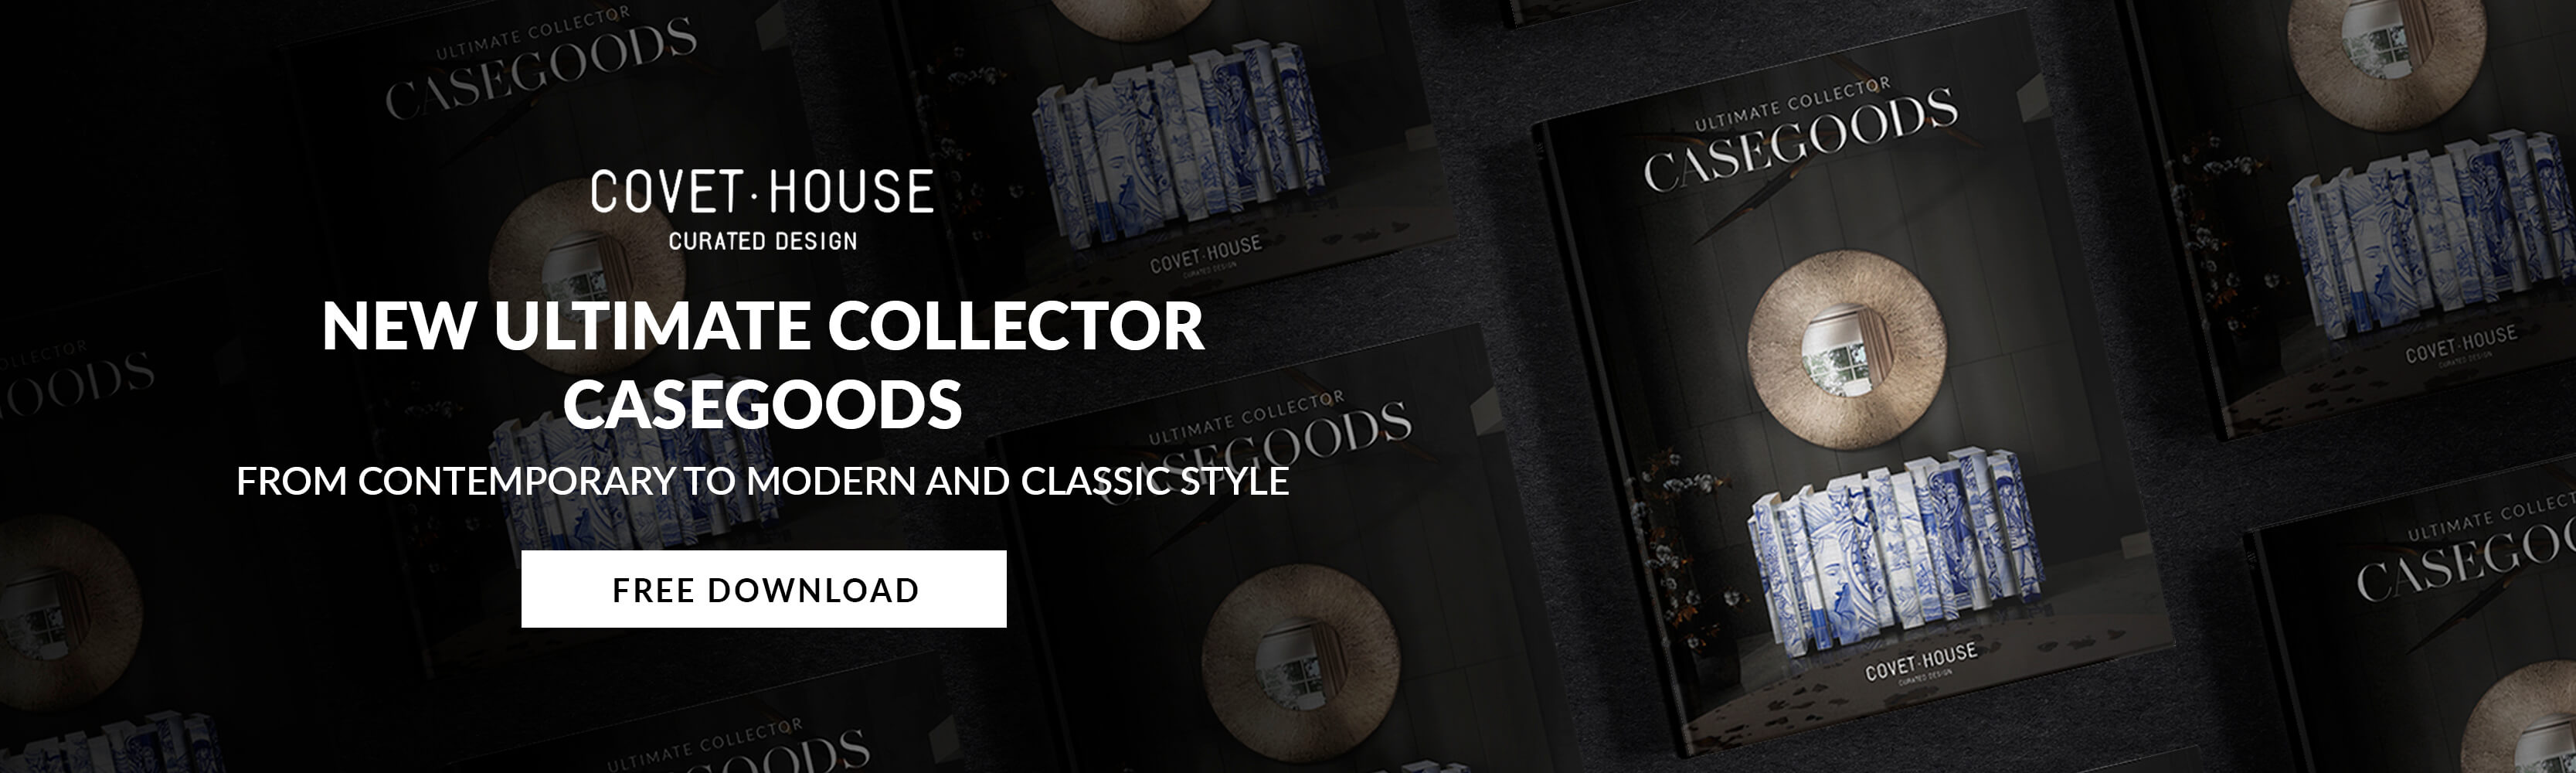 The Ultimate Collector Casegoods Covet House